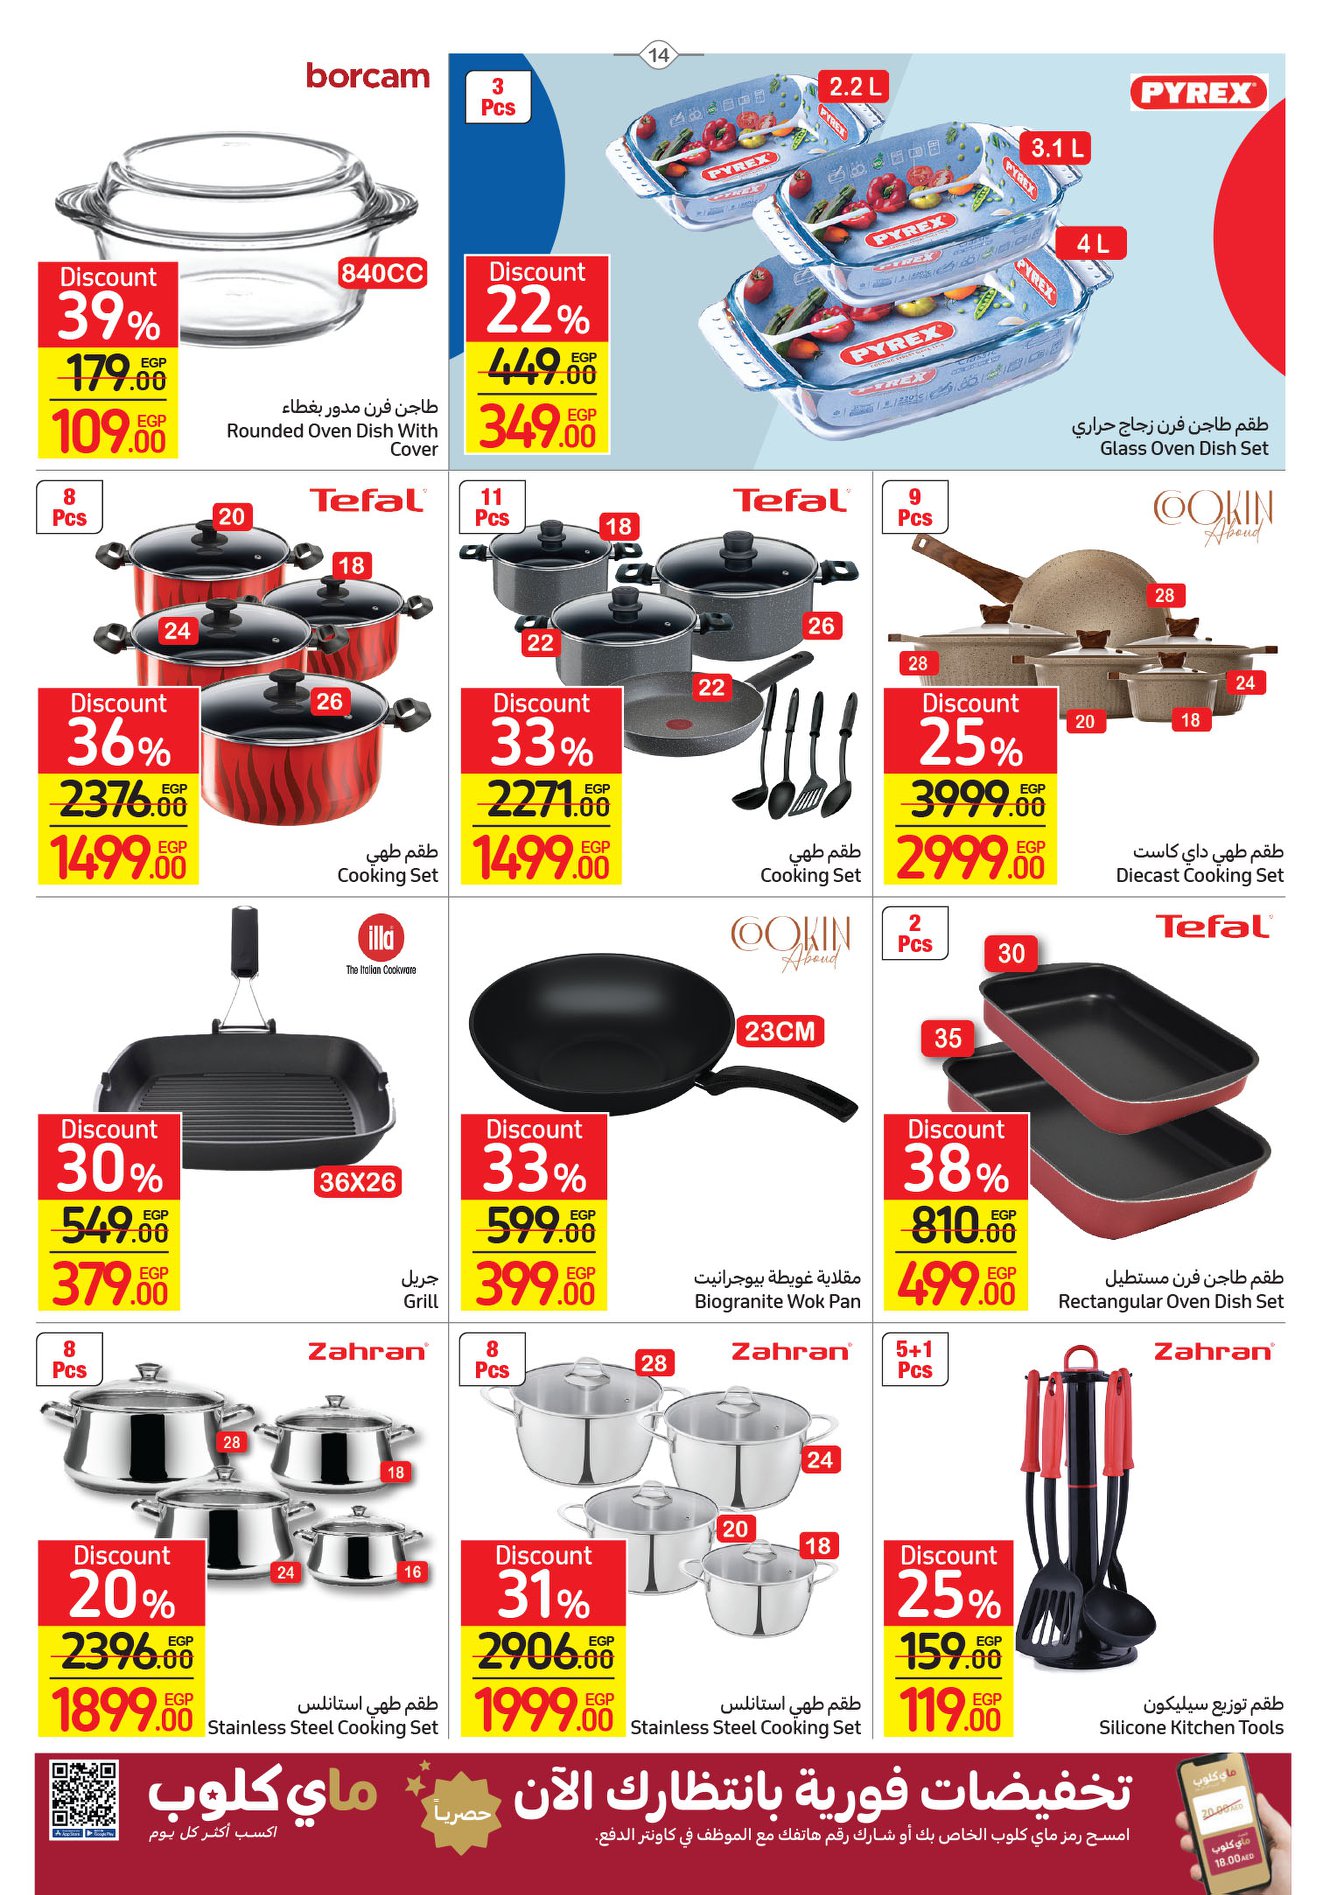 Enjoy now the strongest Carrefour offers from 17 to 25 April 2022.. Huge discounts on home essentials 11